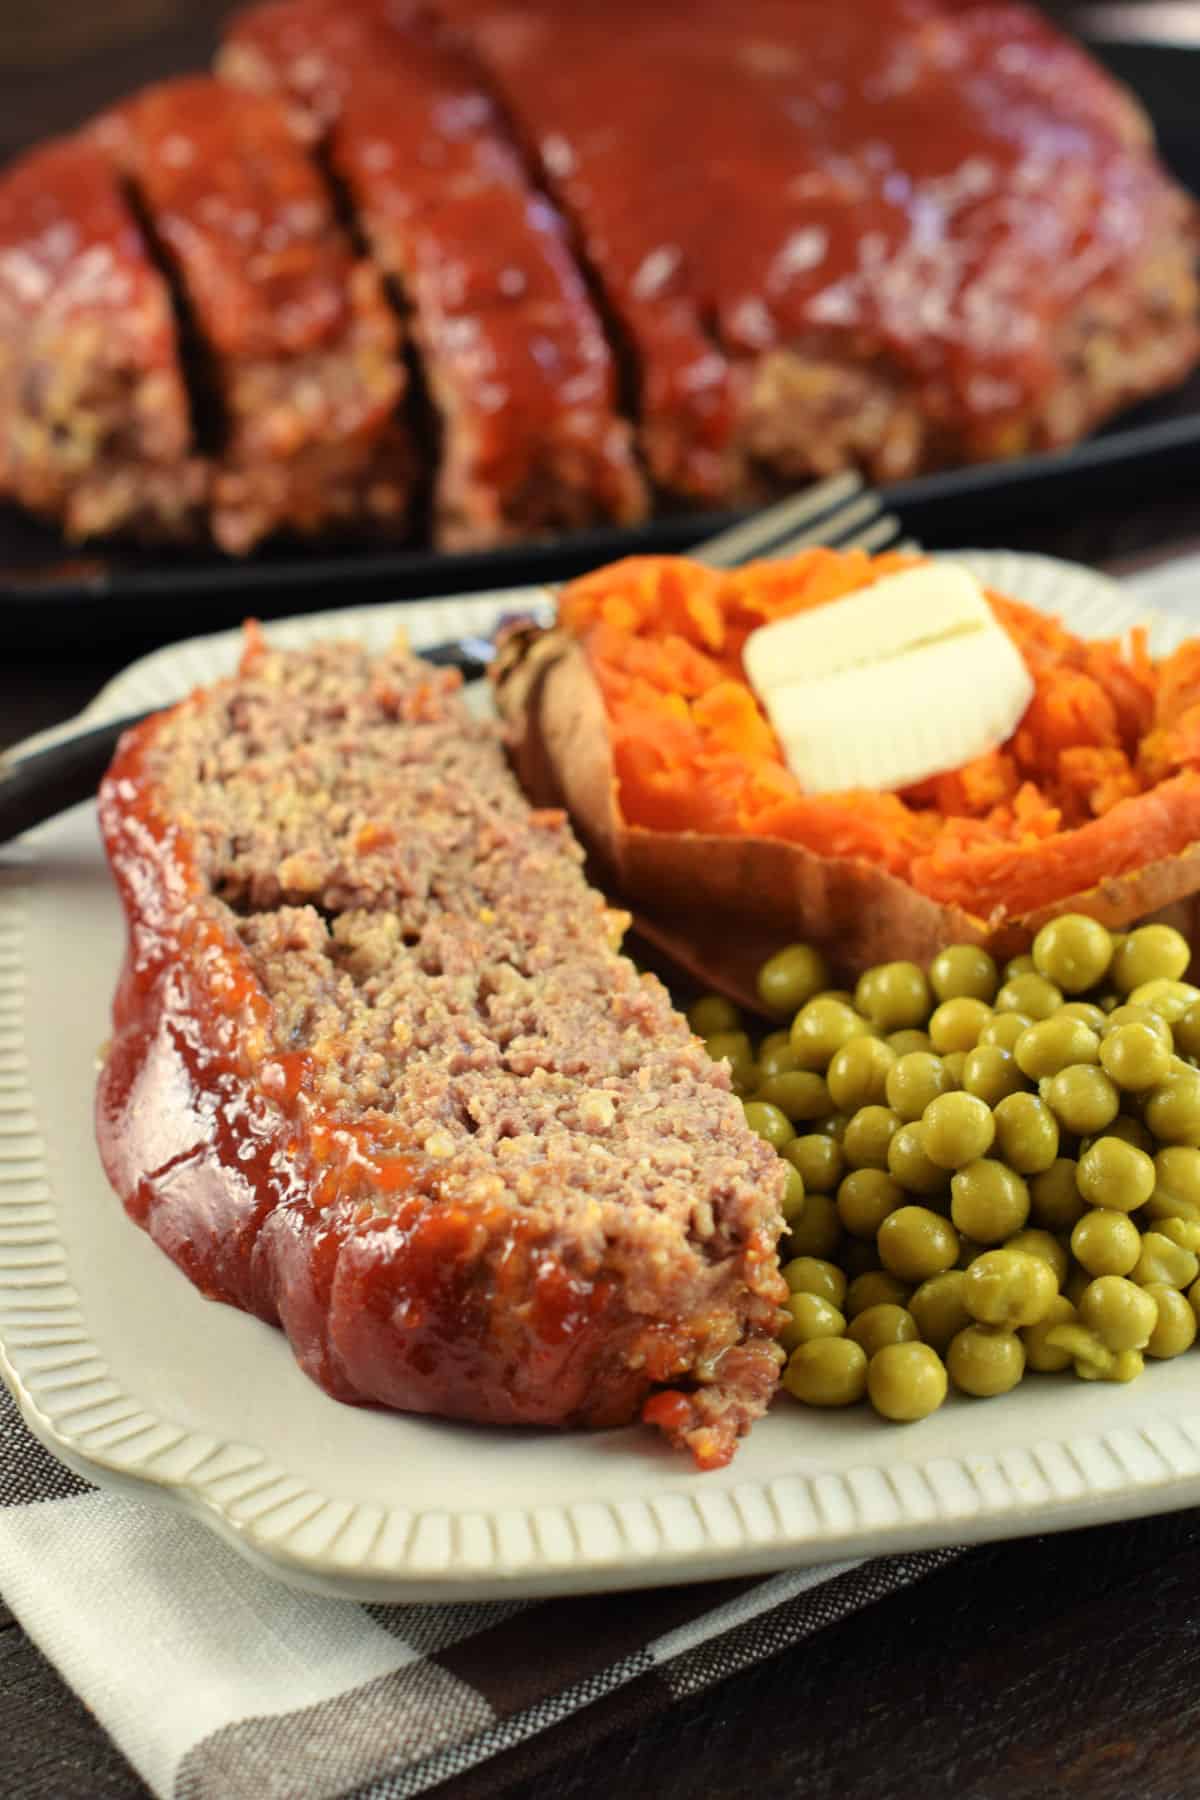 Meatloaf with glaze served on a plate with peas and sweet potato.